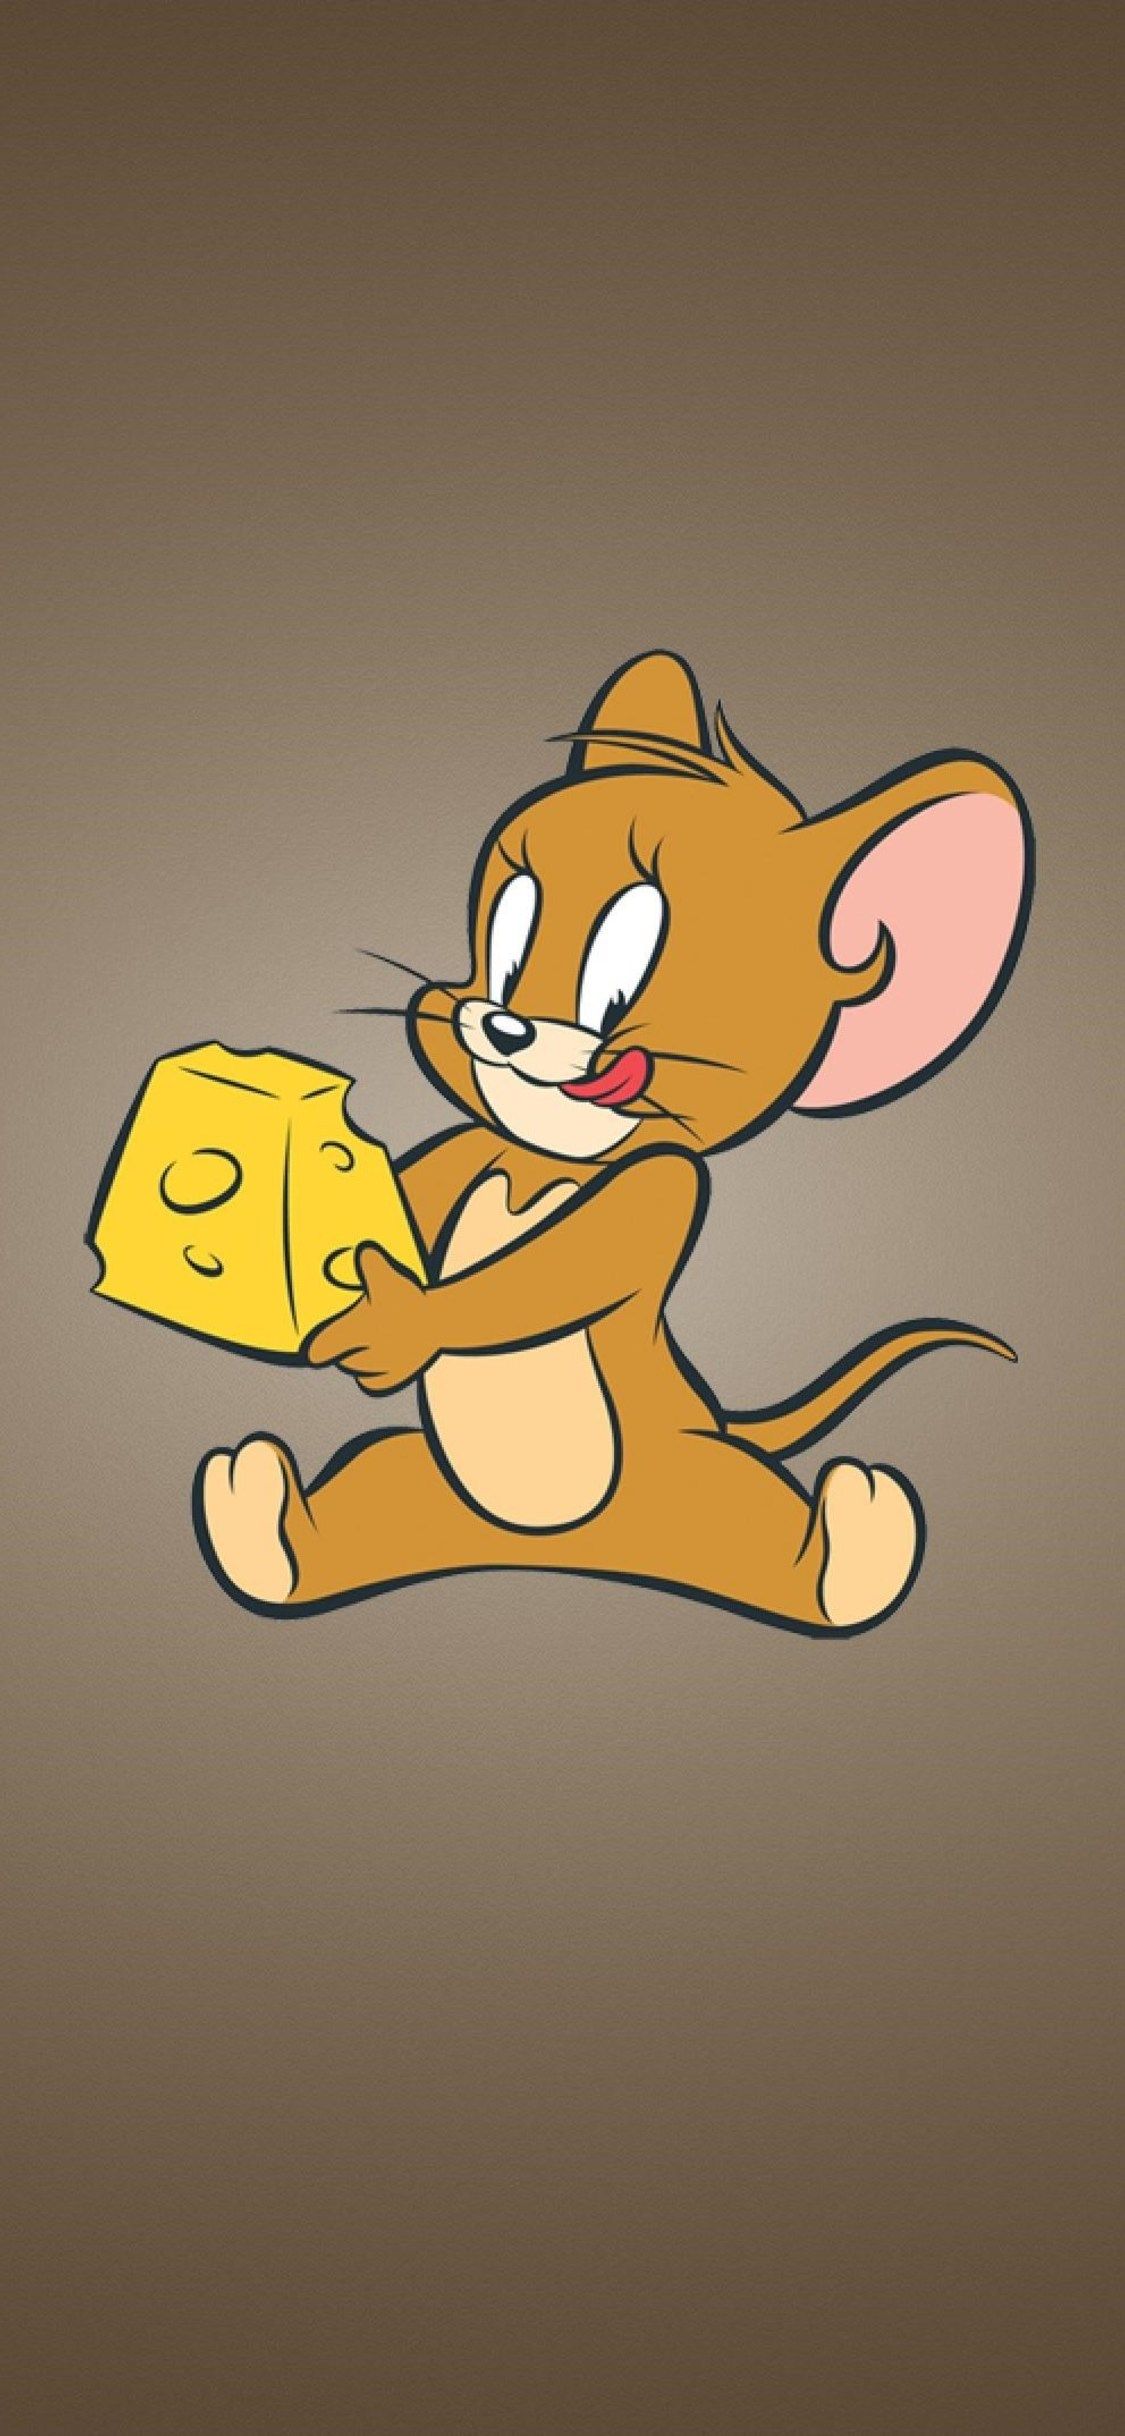 Tom and Jerry iPhone Wallpaper Free Tom and Jerry iPhone Background